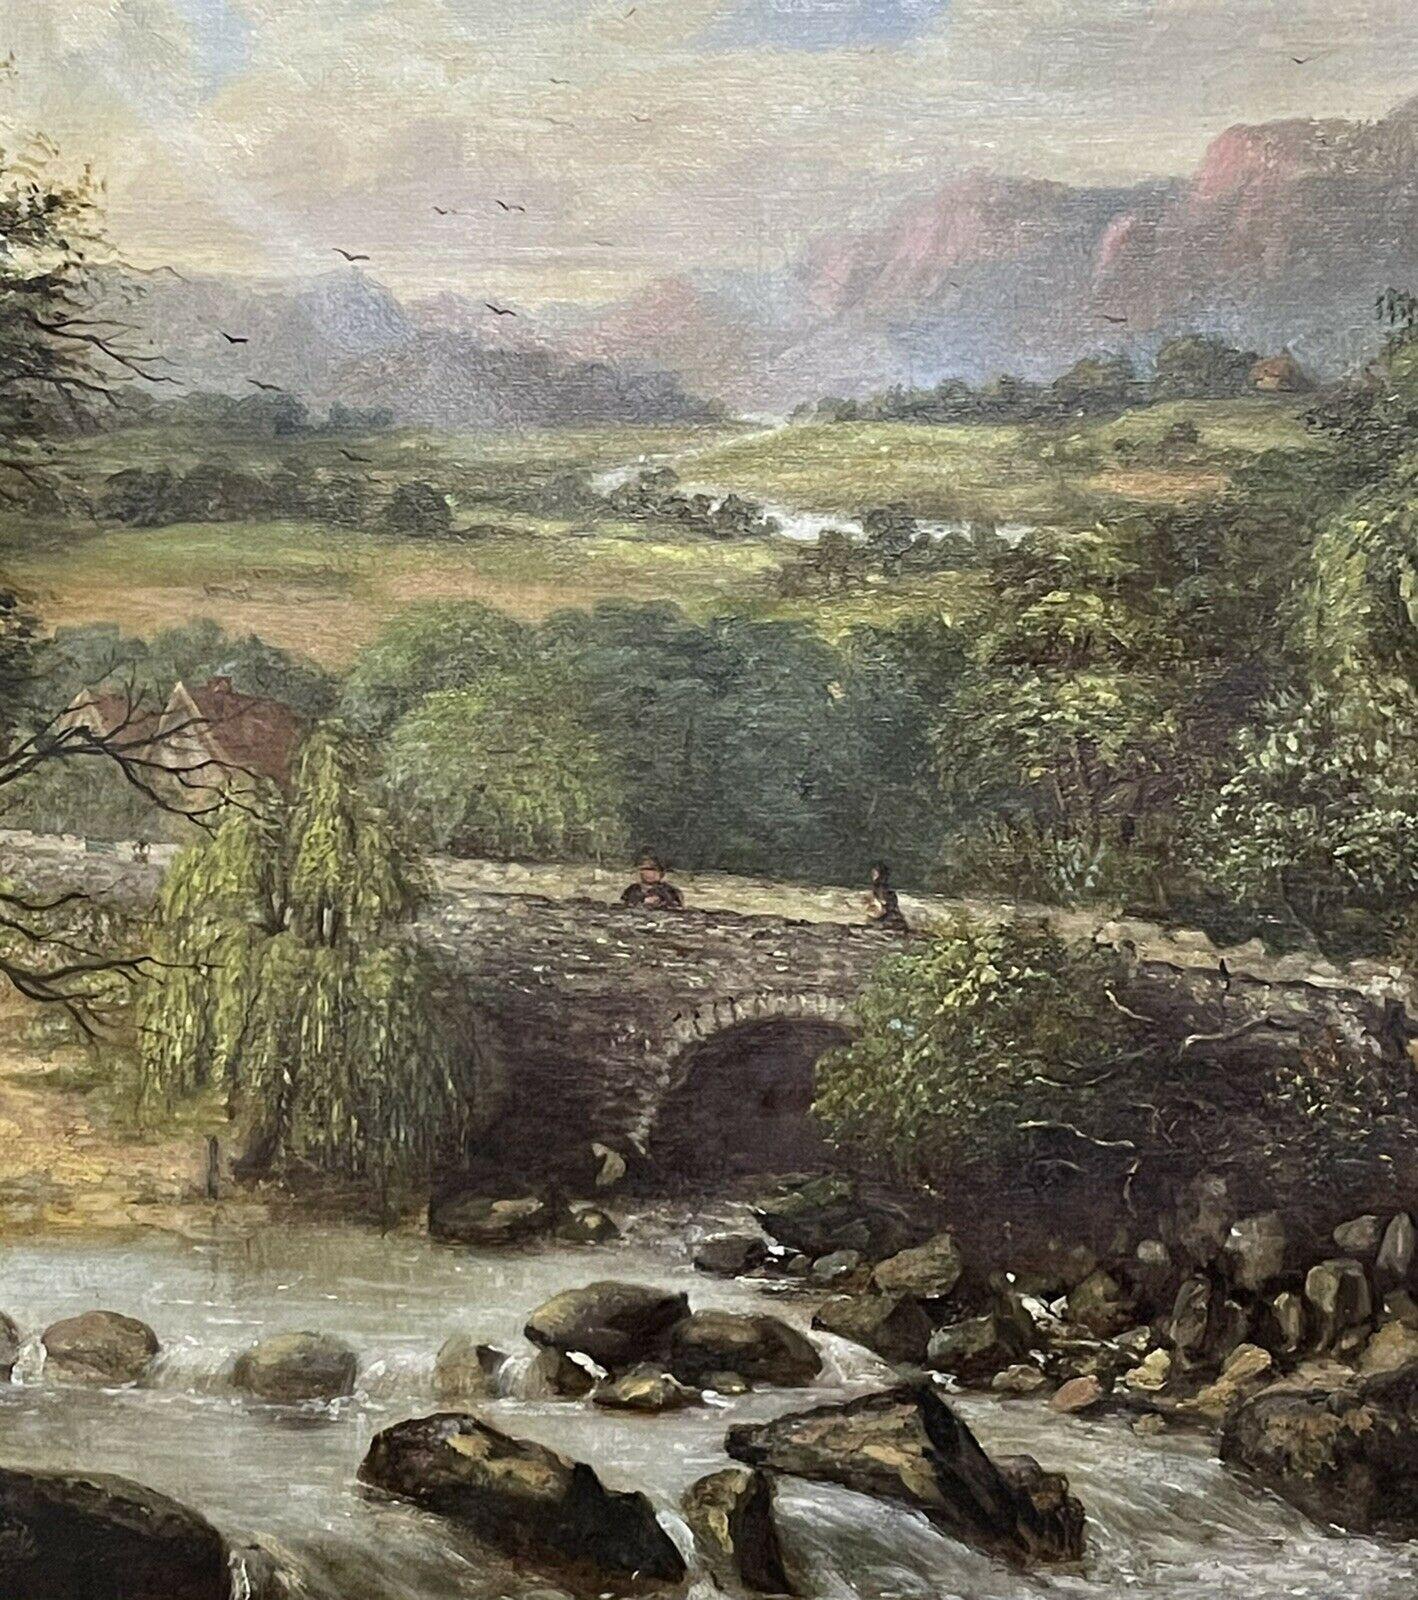 Artist/ School: signed, 'Barnes' (British School, 19th century), dated 1867. 

Title: Mountainous River Landscape. 

Medium: oil painting on canvas, framed.

Size:  painting: 11 x 21 inches, frame: 18 x 28.25 inches 

Provenance: private collection,